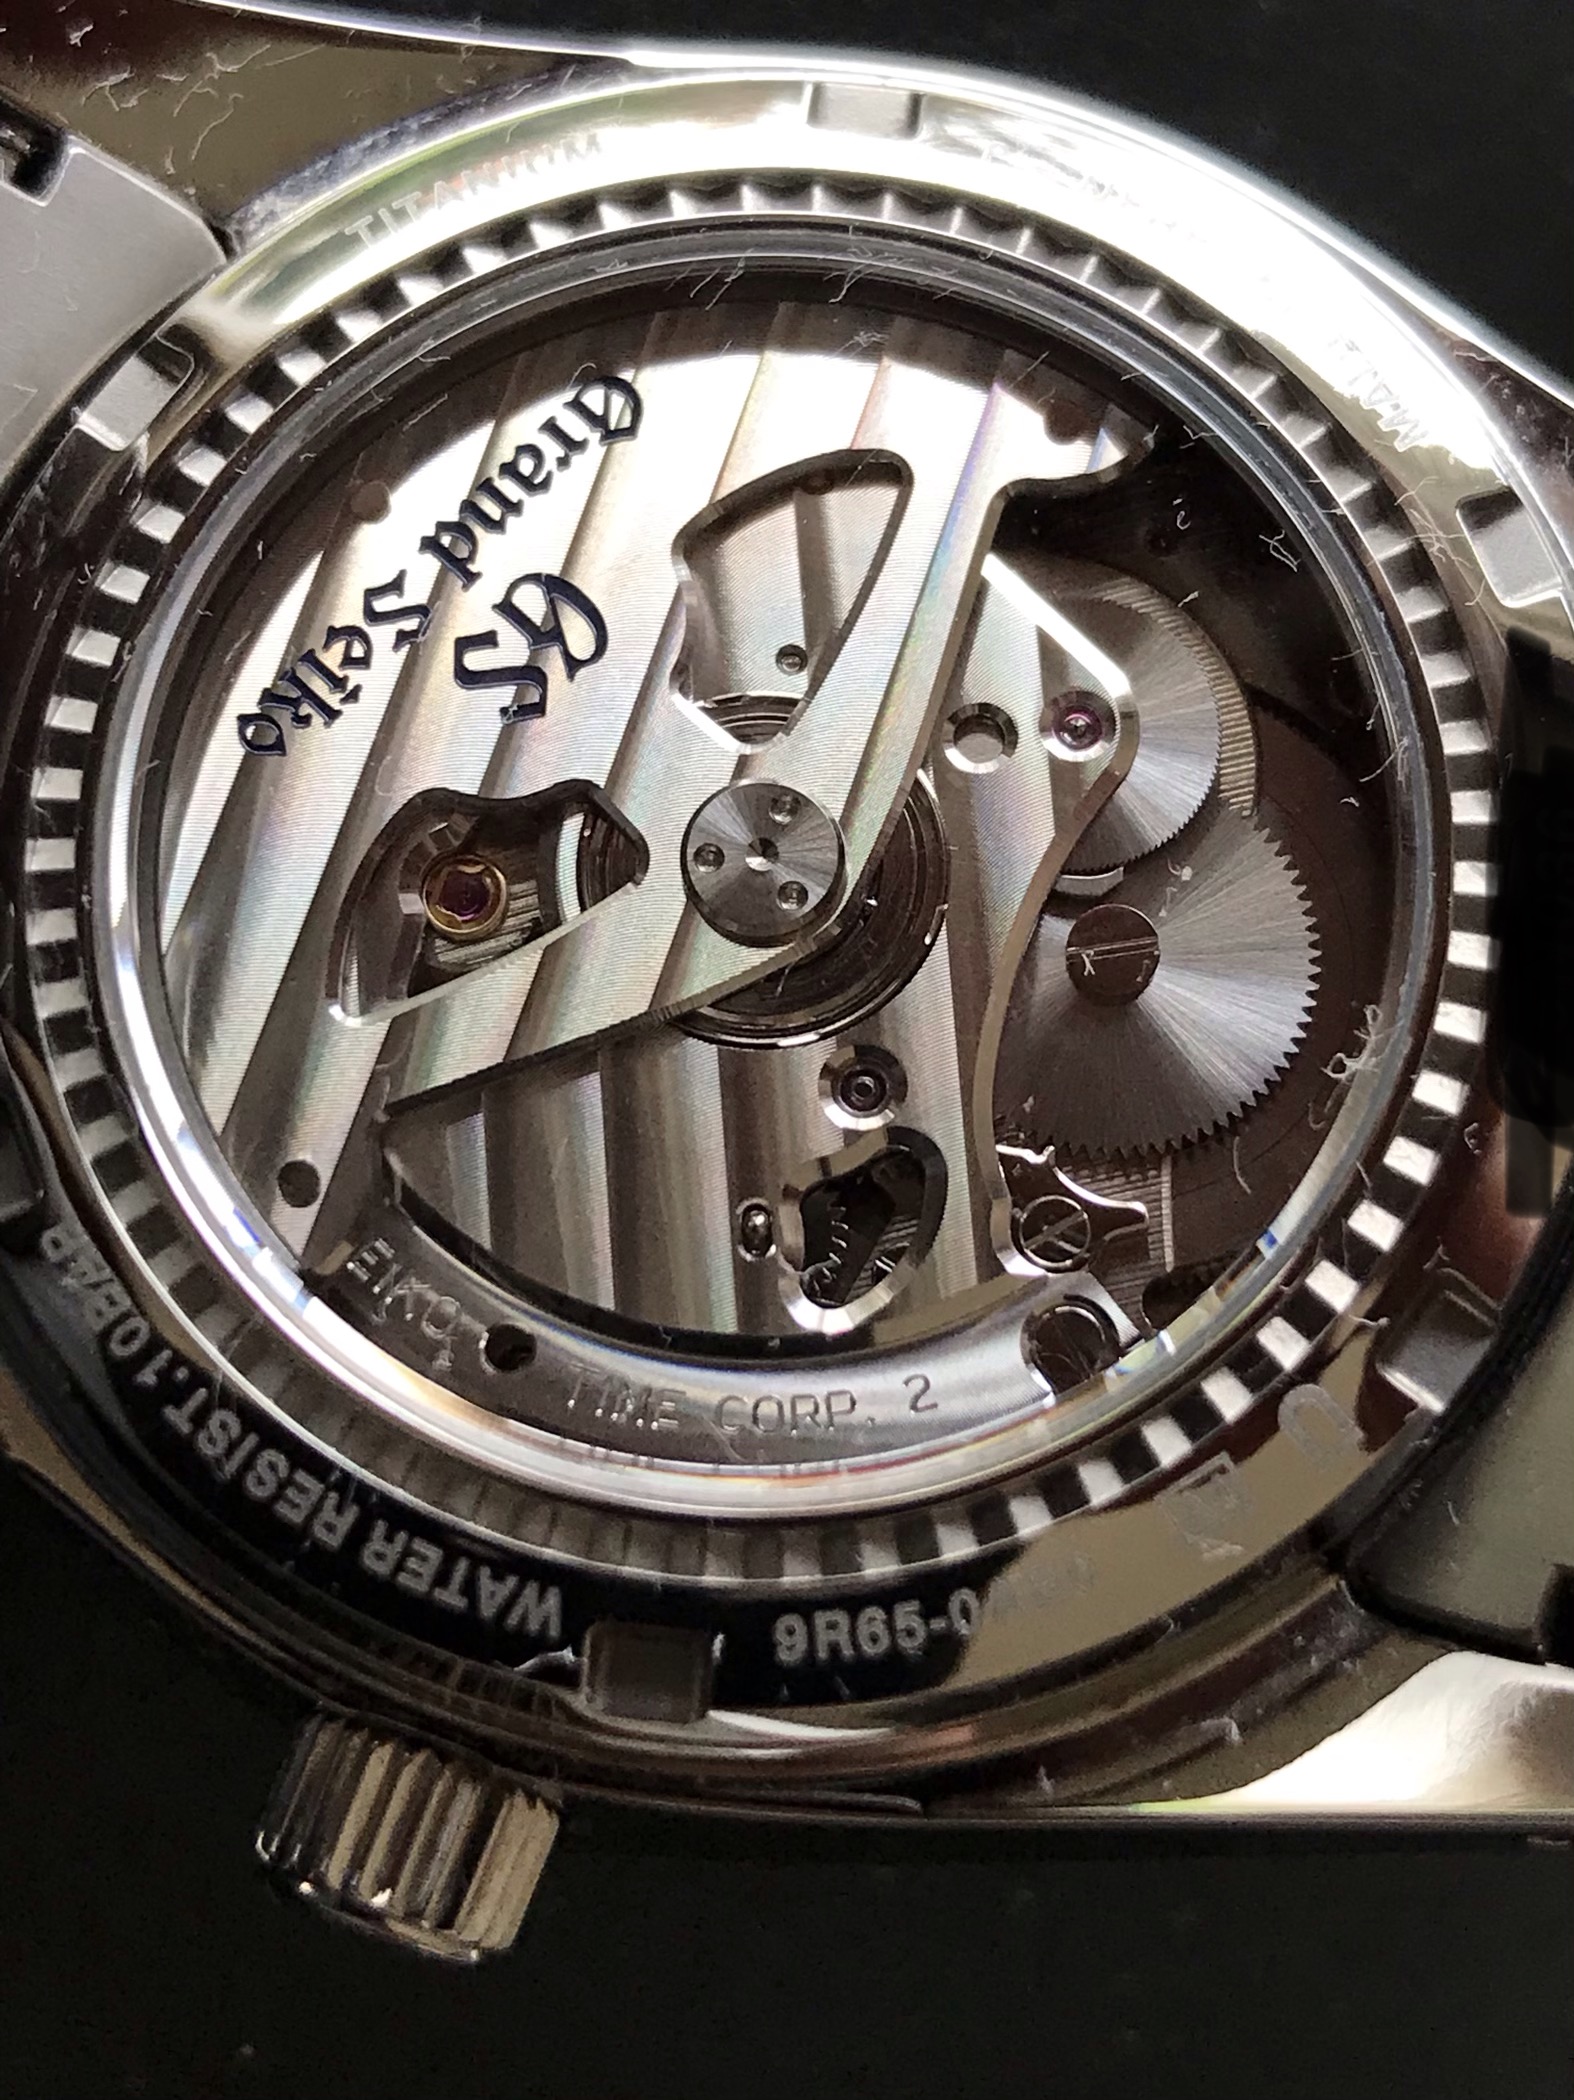 Is Grand Seiko getting better? | Page 4 | Omega Forums